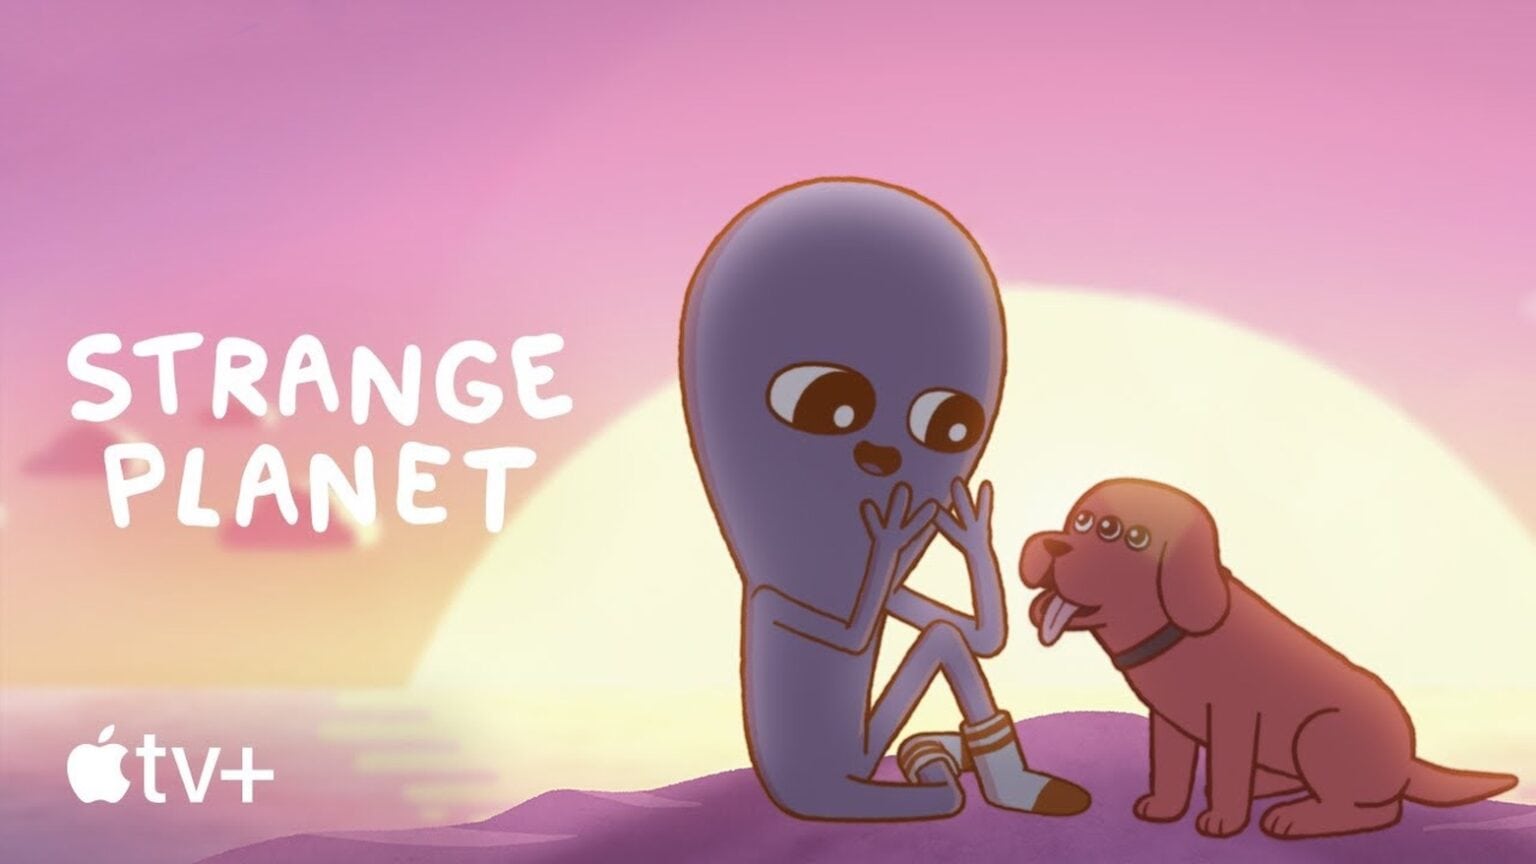 Trailer takes first trip to Apple’s whimsical ‘Strange Planet’ comedy series